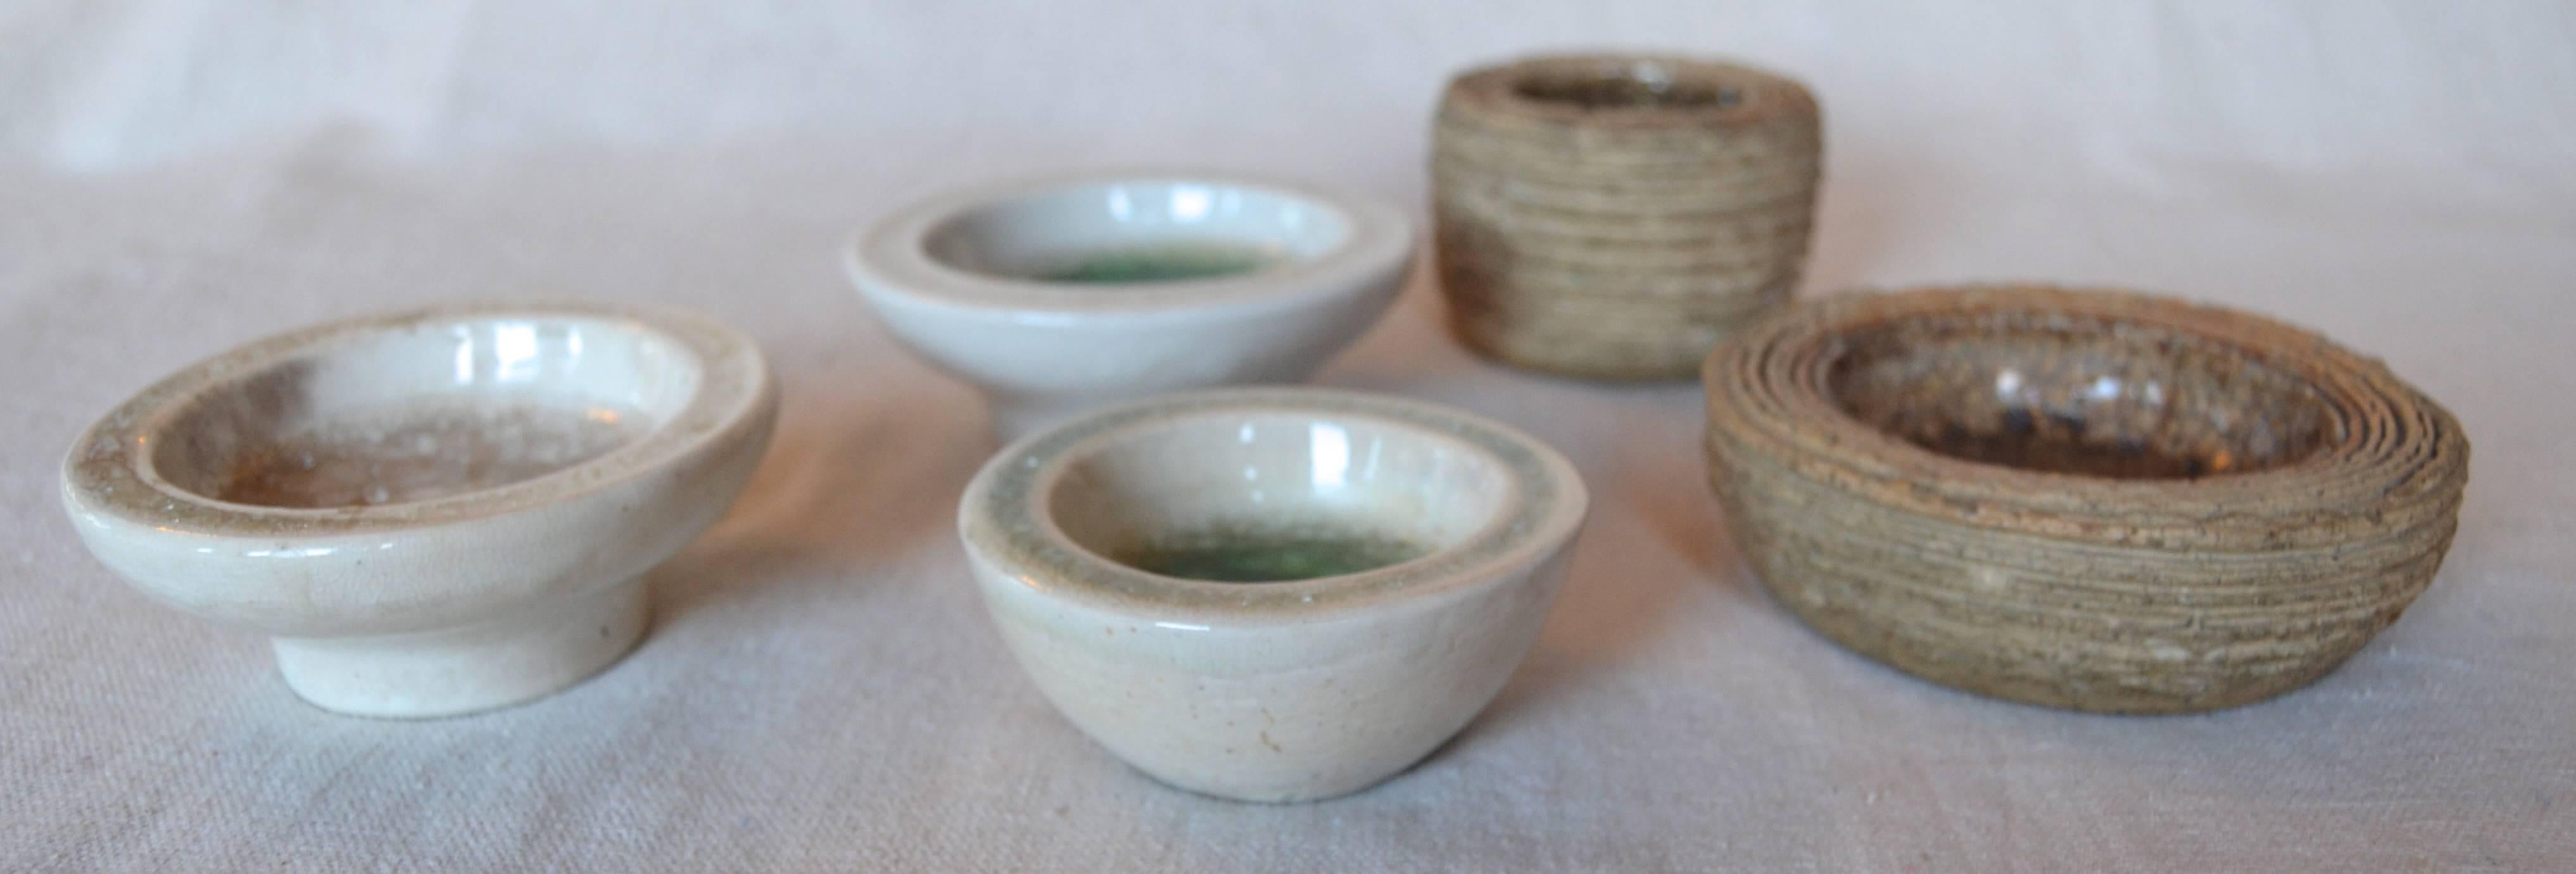 Five small Waylande Gregory bowls, three have the fused glass glaze and two are unglazed stoneware with a metallic glaze interior.
Sizes: All in inches
large unglazed 4.25 x 1.5, small unglazed 3 x 2.12, small fused glass (studio) 3.25 x 1.12,